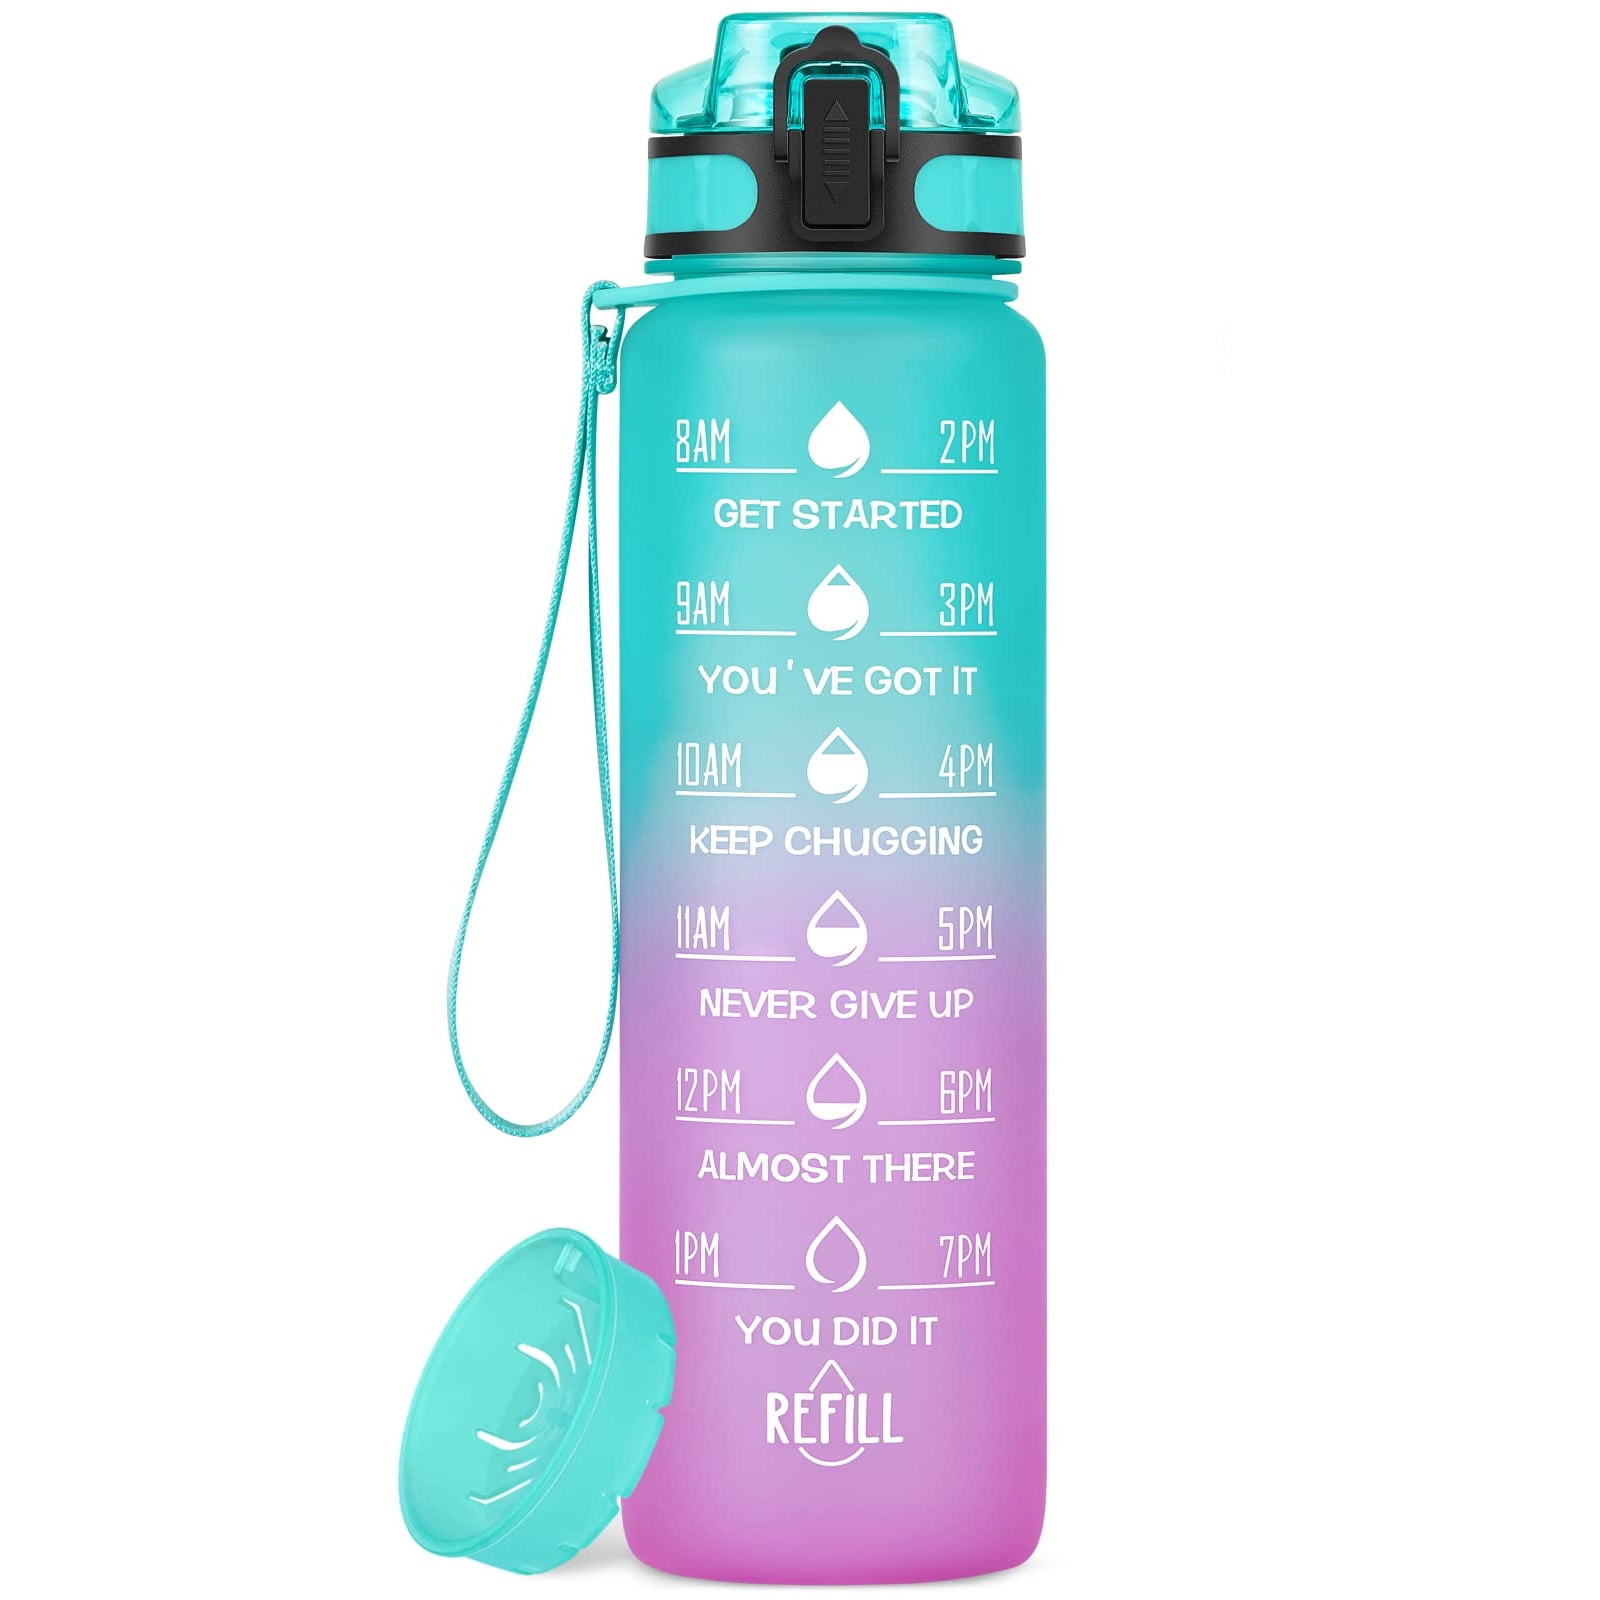 Esgreen Sports Water Bottles 32 oz With Motivational Time Maker, No Straw,  BPA & Toxic Free, 32oz big Measured Plastic Water Jugs For Drinking With  Strap For Women Girls Men, For Travel,Gym,School 